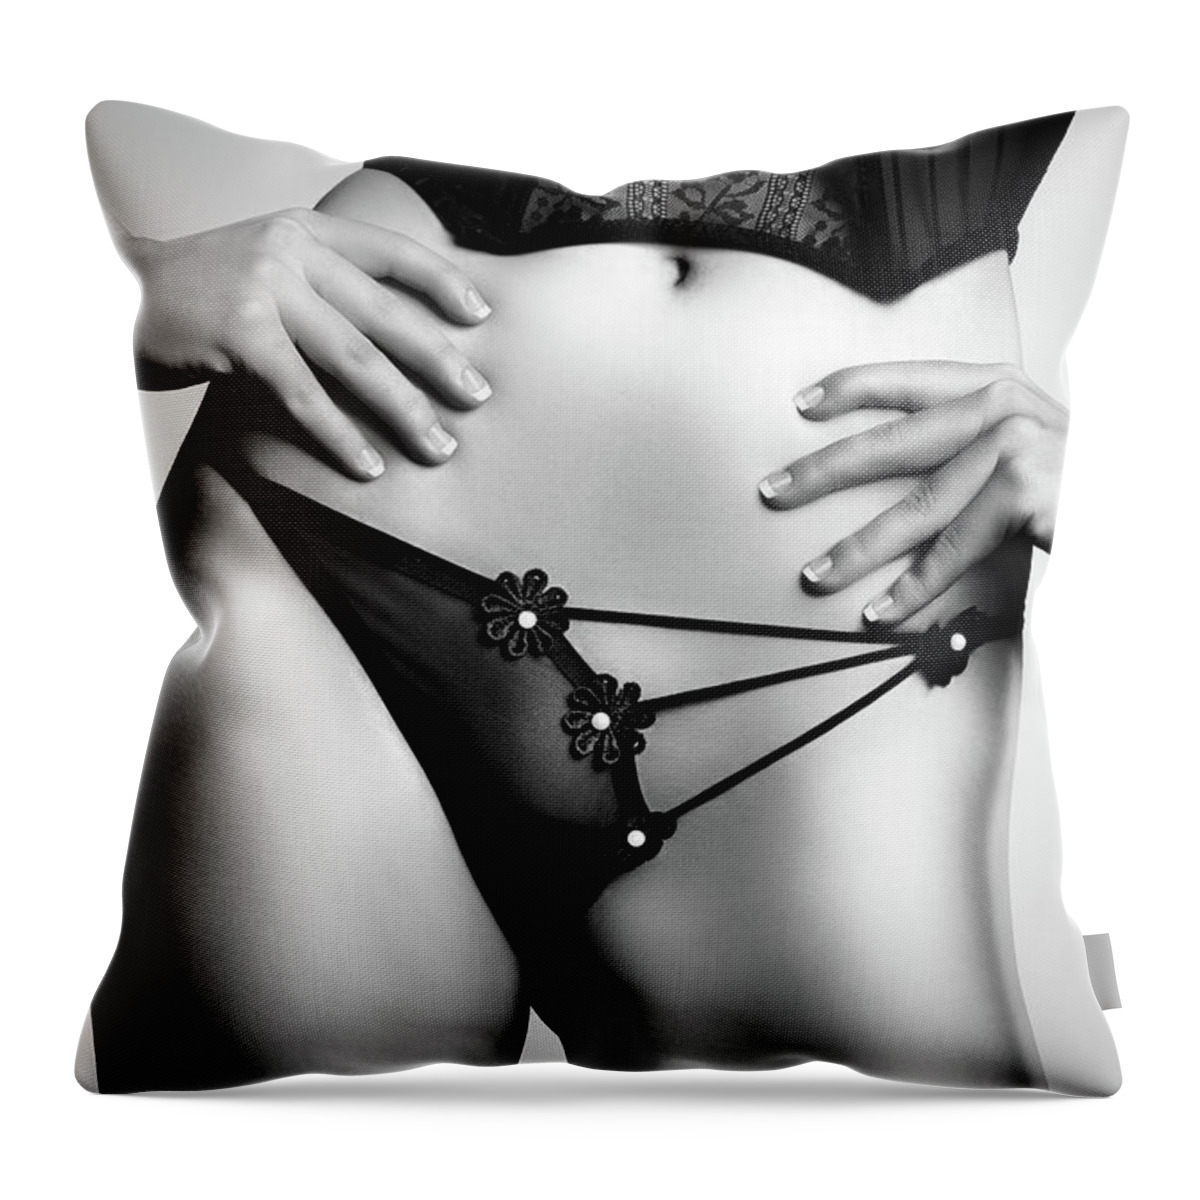 Woman Throw Pillow featuring the photograph Woman in Lingerie by Johan Swanepoel